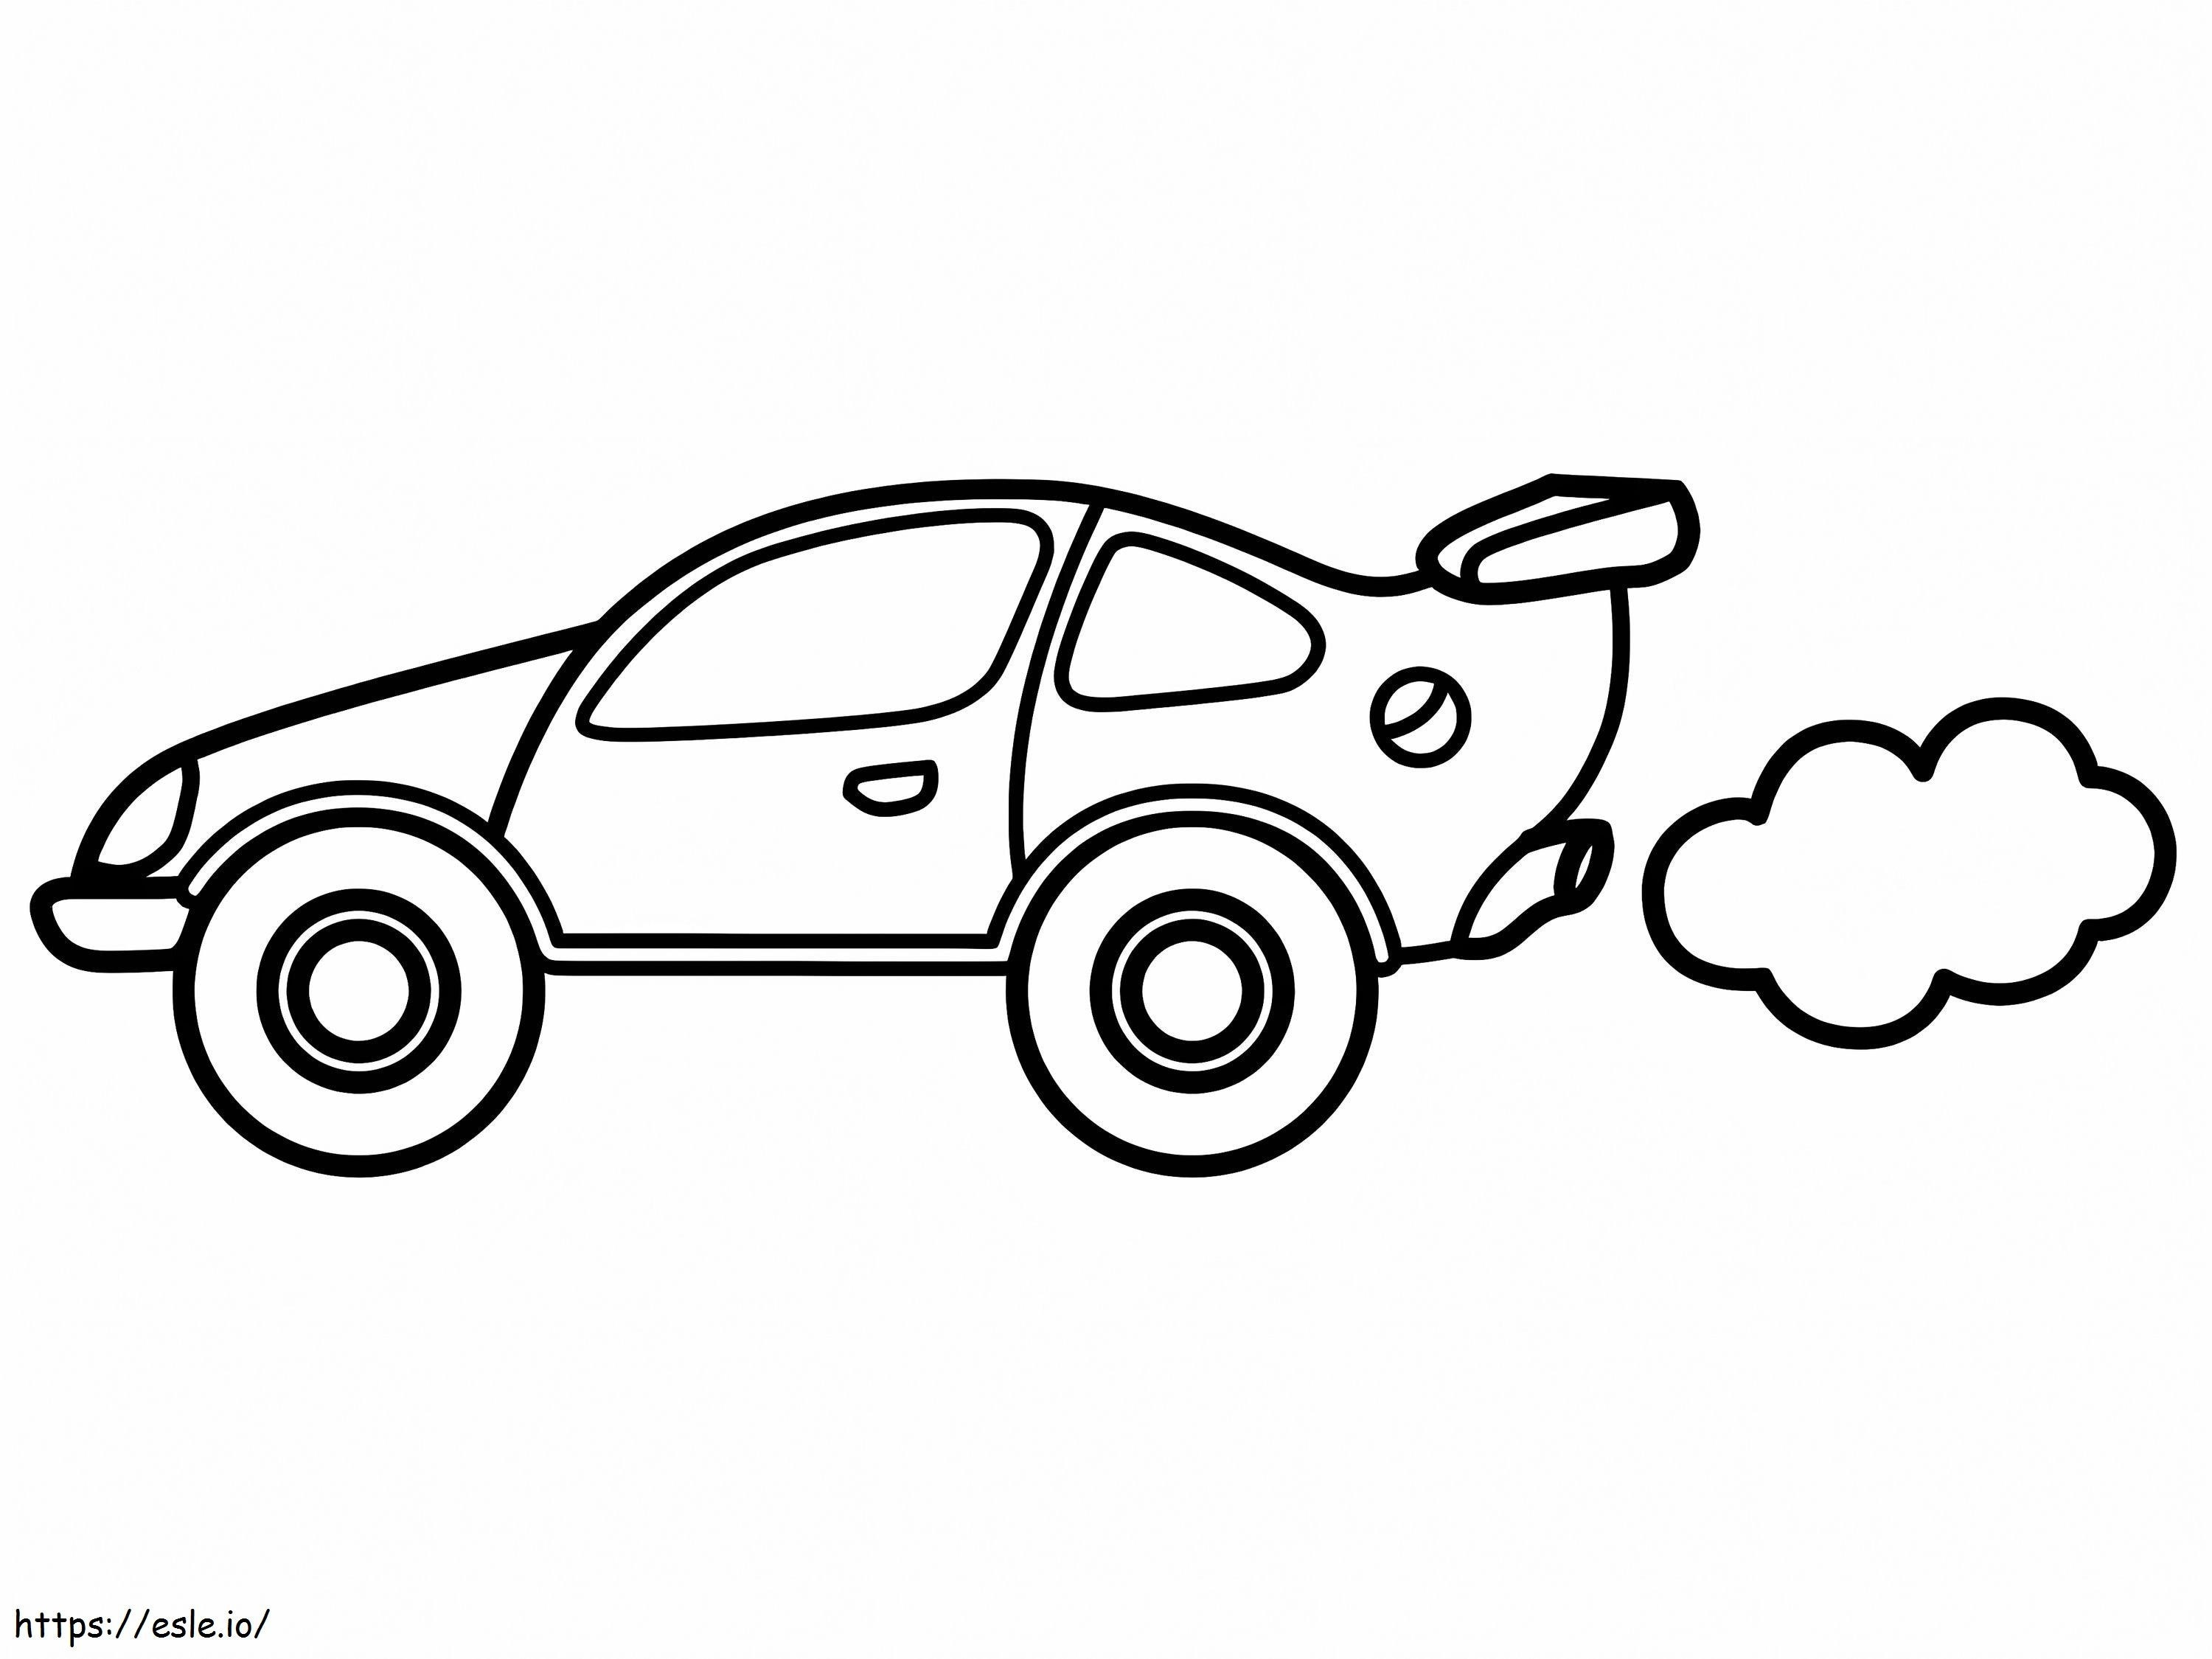 Very Fast Car coloring page